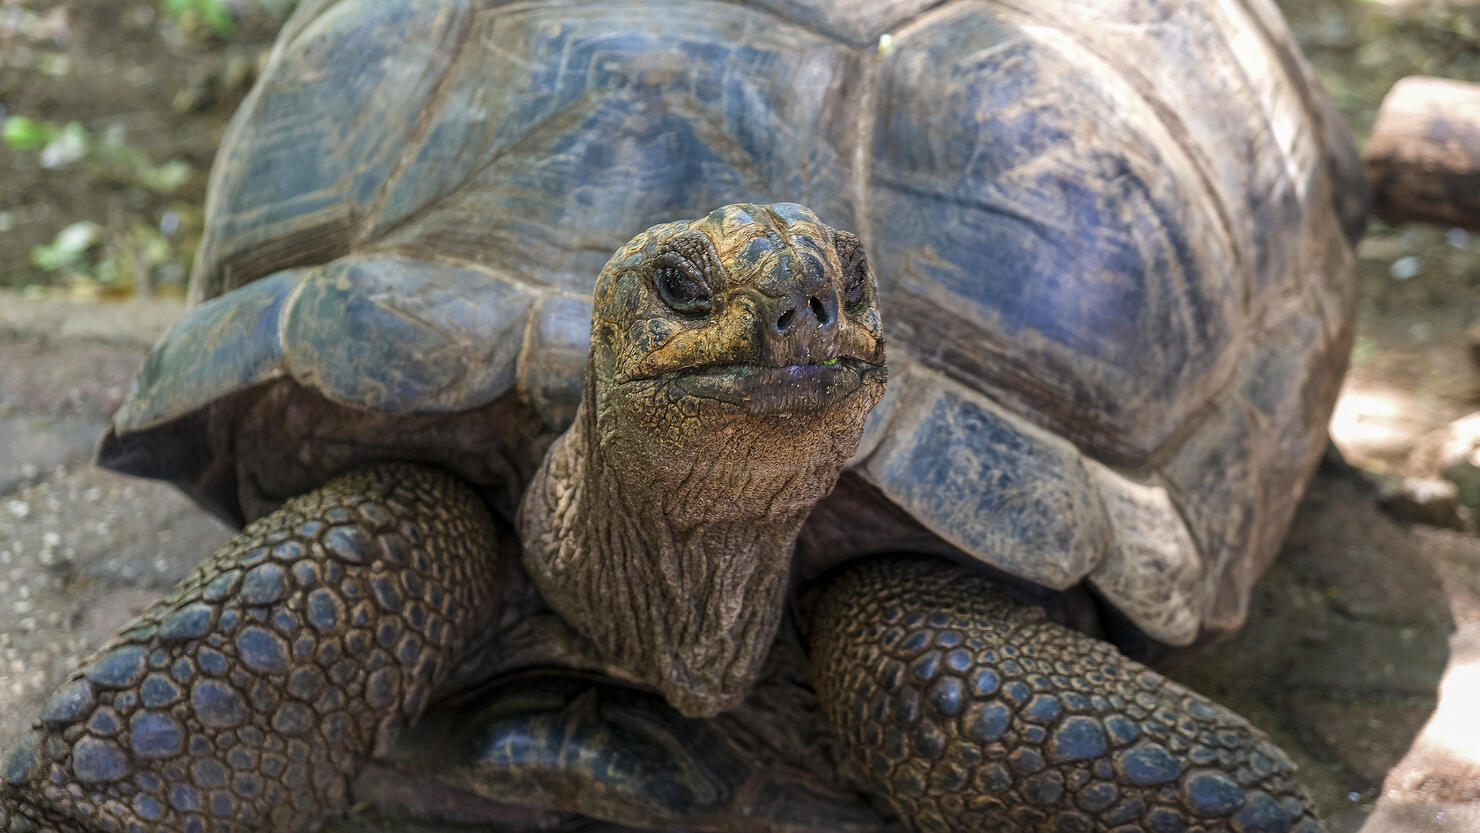 Giant African tortoise Aldabra on an island in the Indian Ocean.